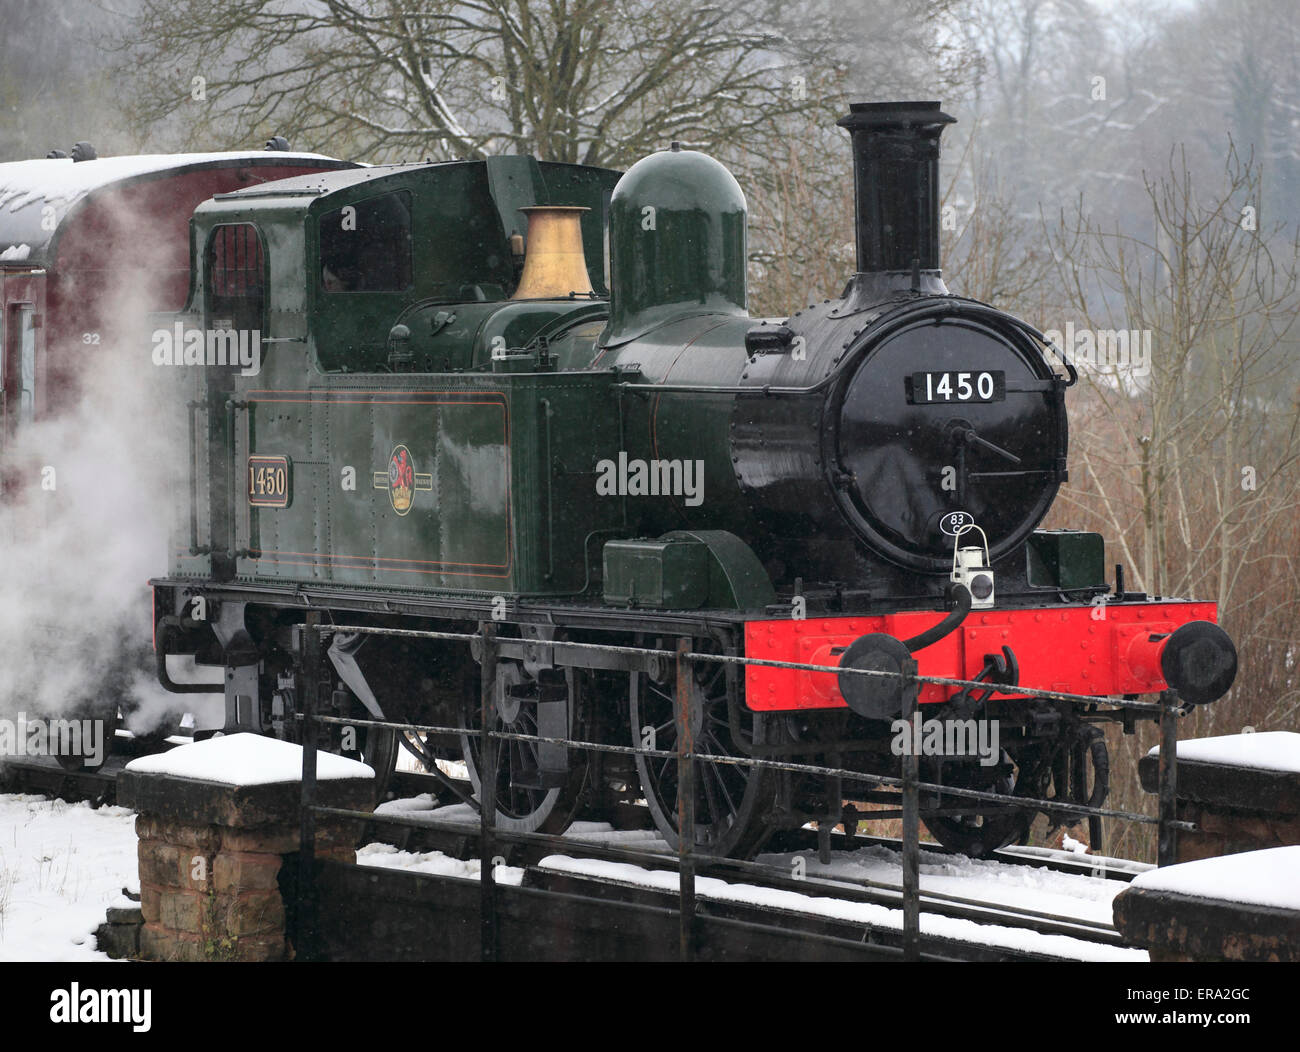 One of Britain's smaller locomotives, No.1450 0-4-2 Tank engine waits just outside of a snowy Highley Stock Photo